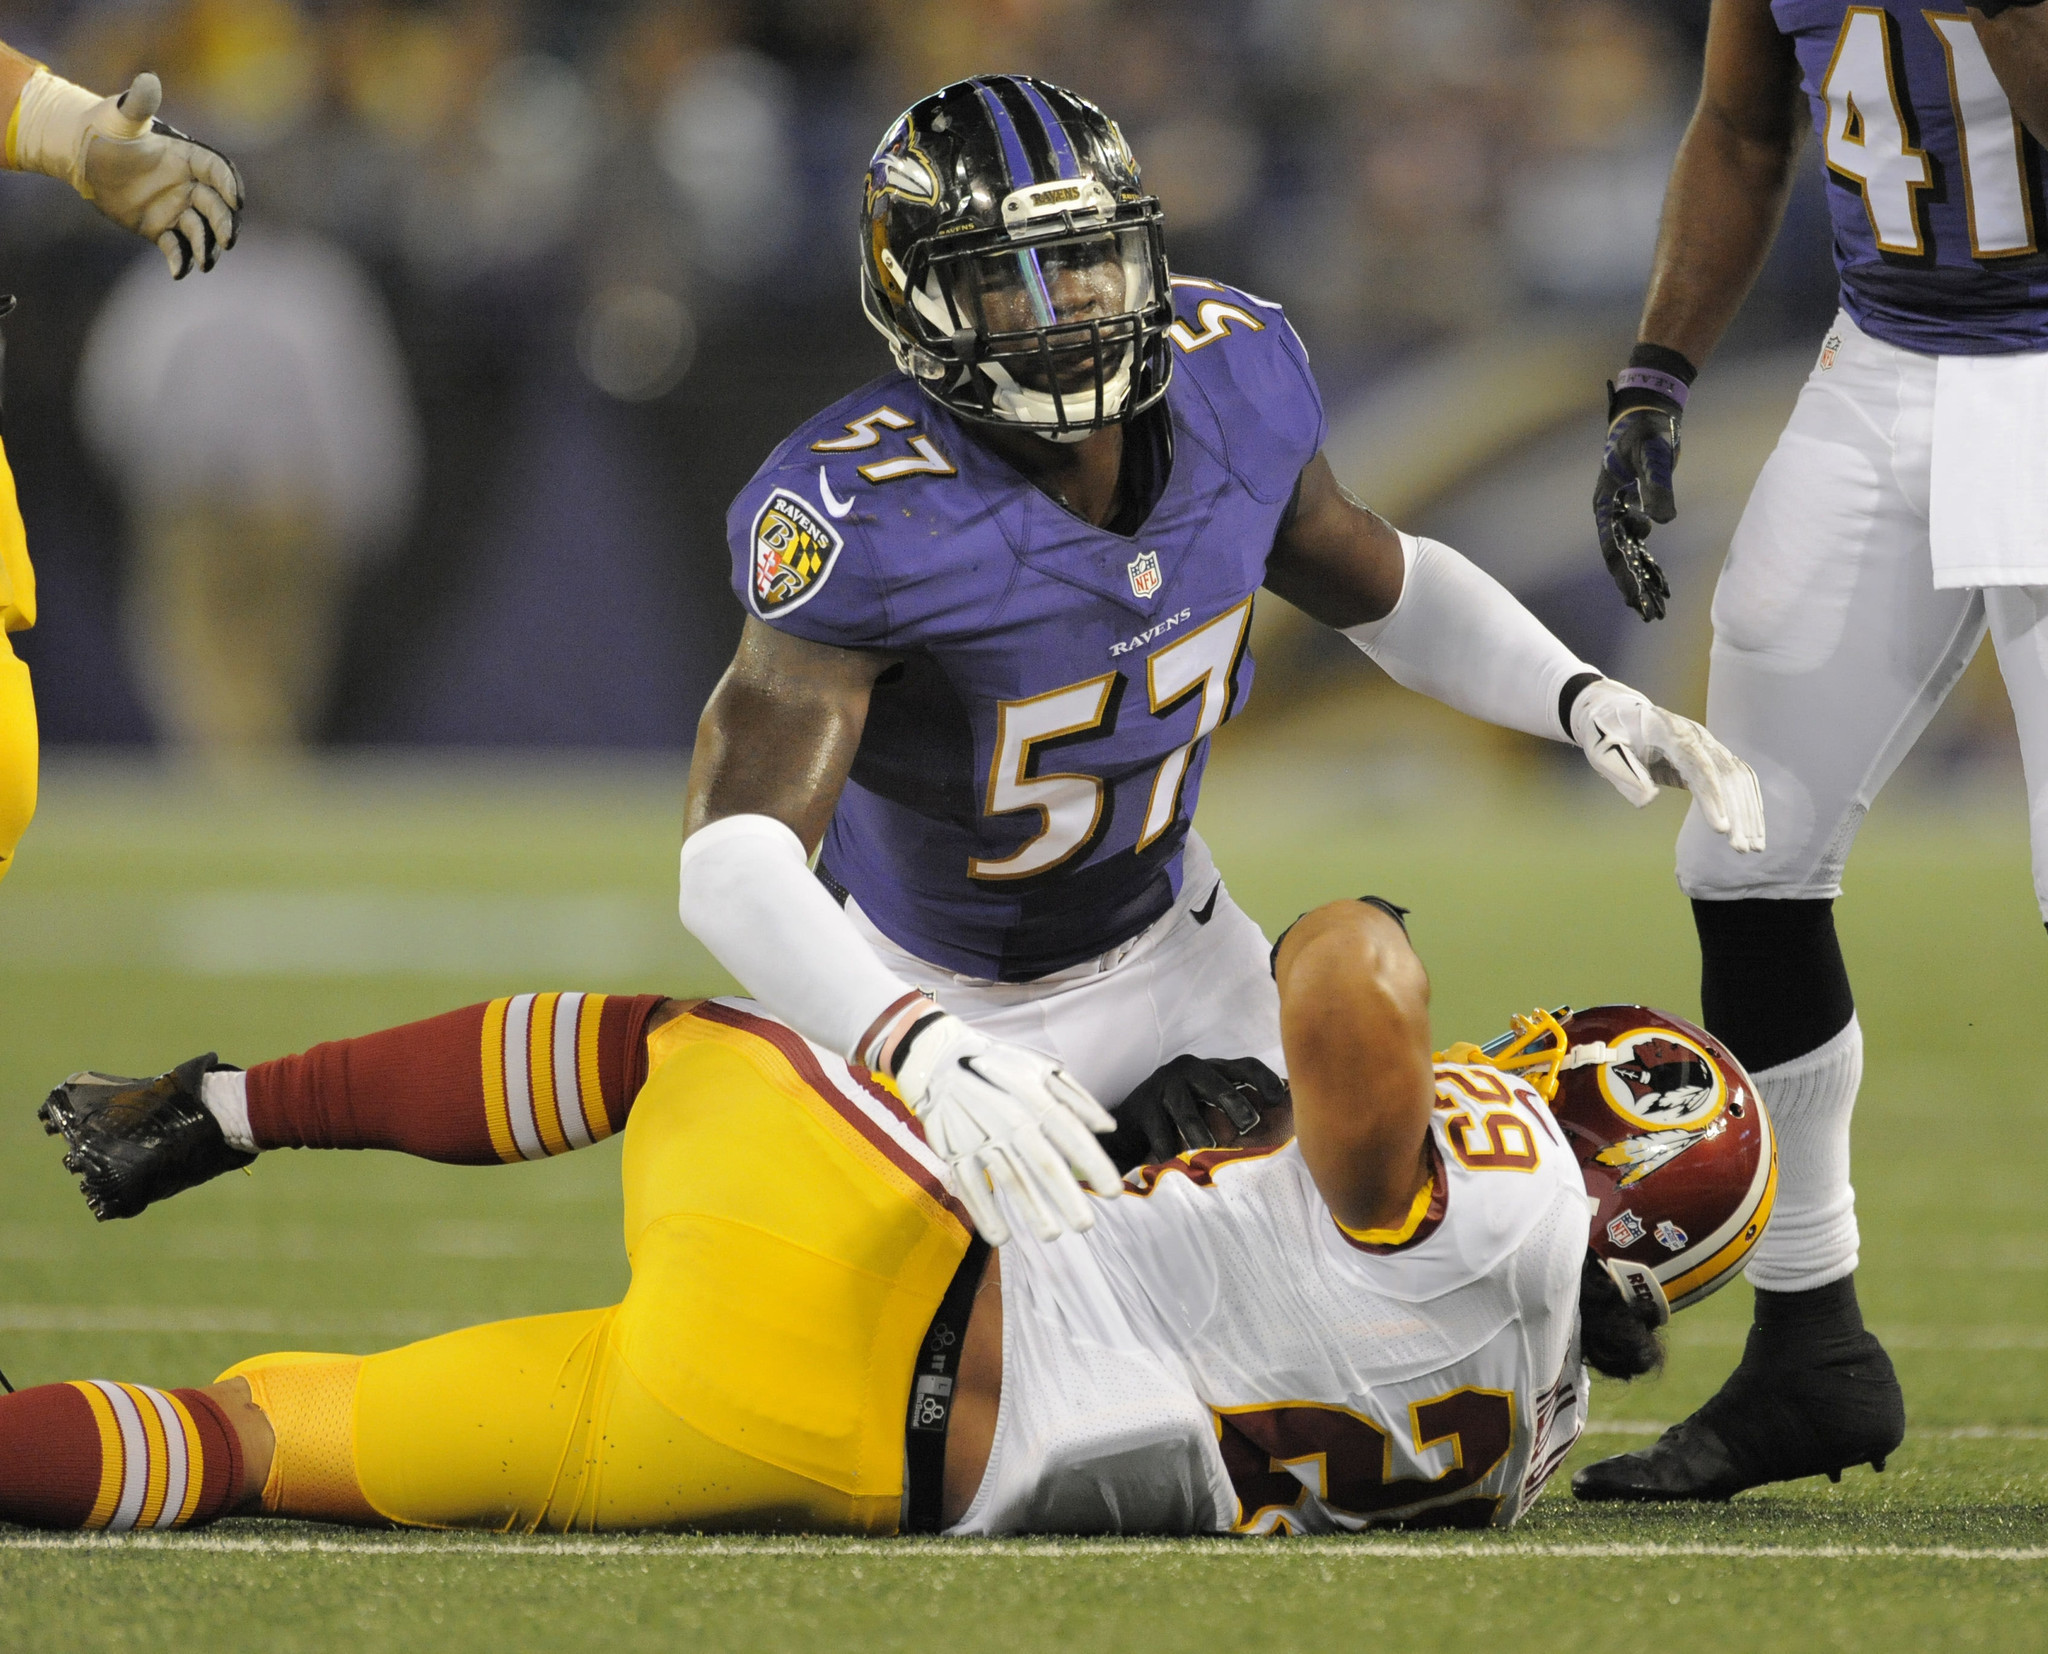 In non-draft news, Ravens pick up 5th-year contract option on C.J. Mosley